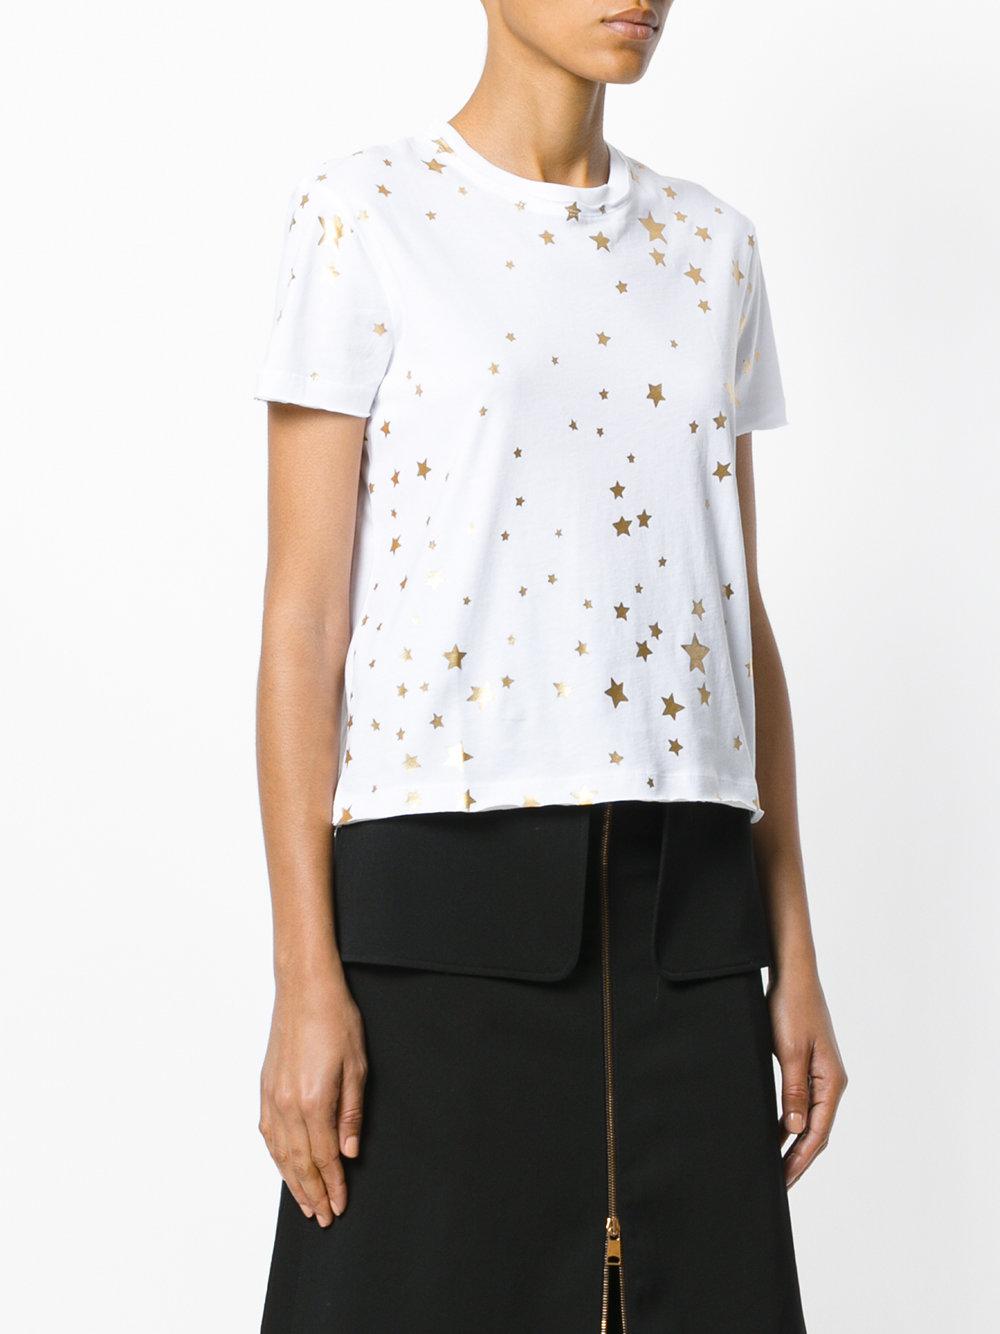 Lyst - Red Valentino Star Print T-shirt in White